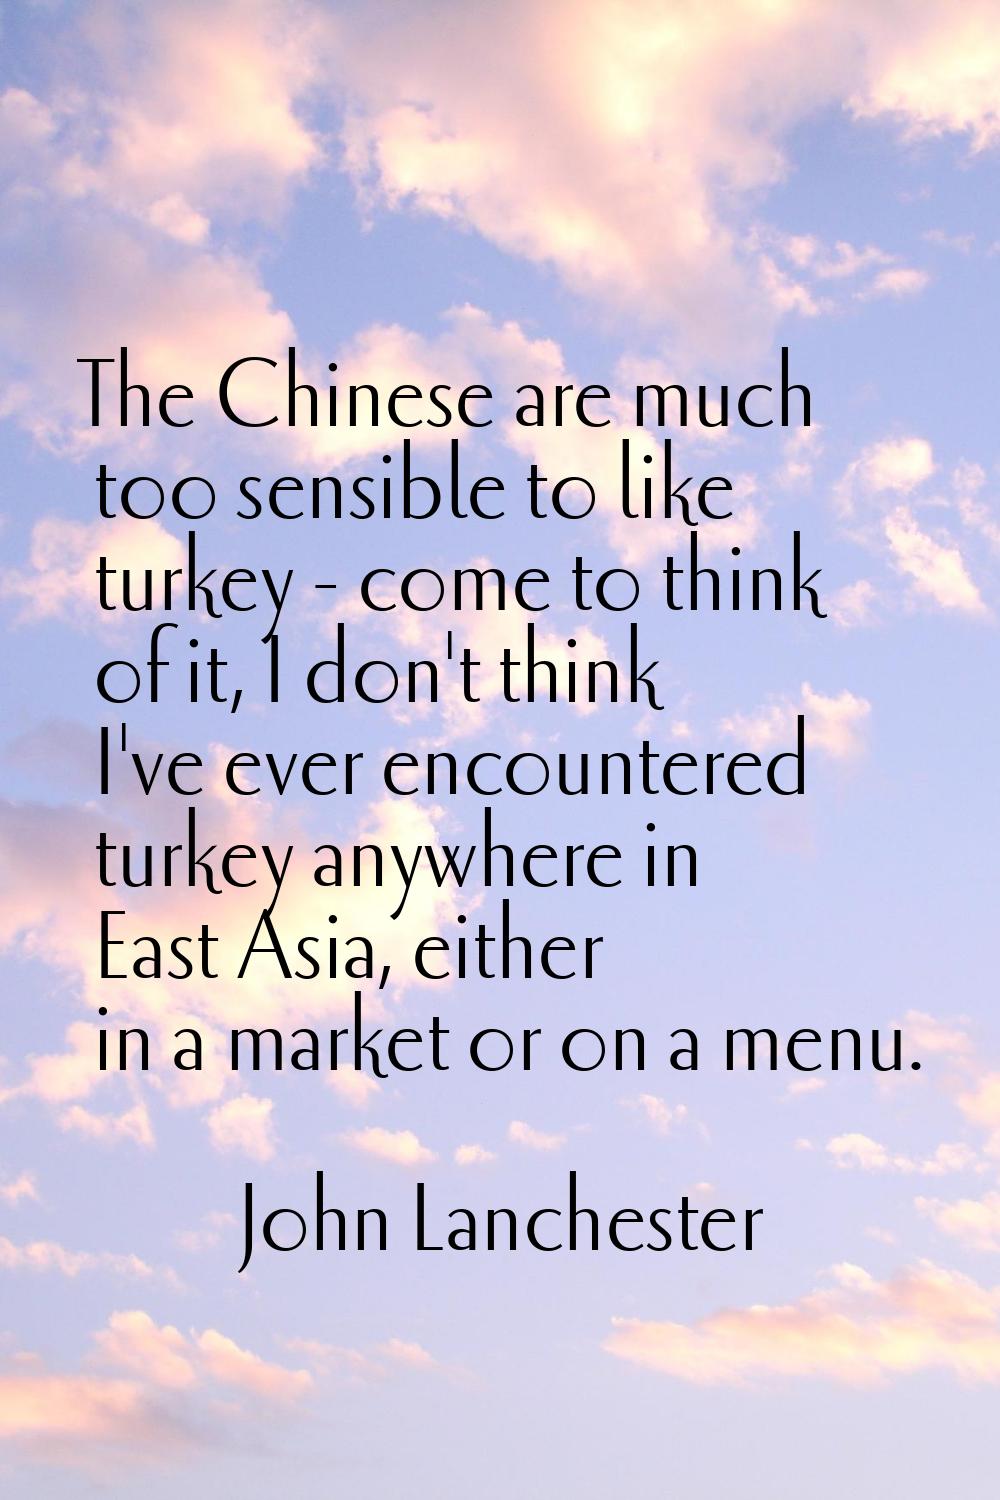 The Chinese are much too sensible to like turkey - come to think of it, I don't think I've ever enc